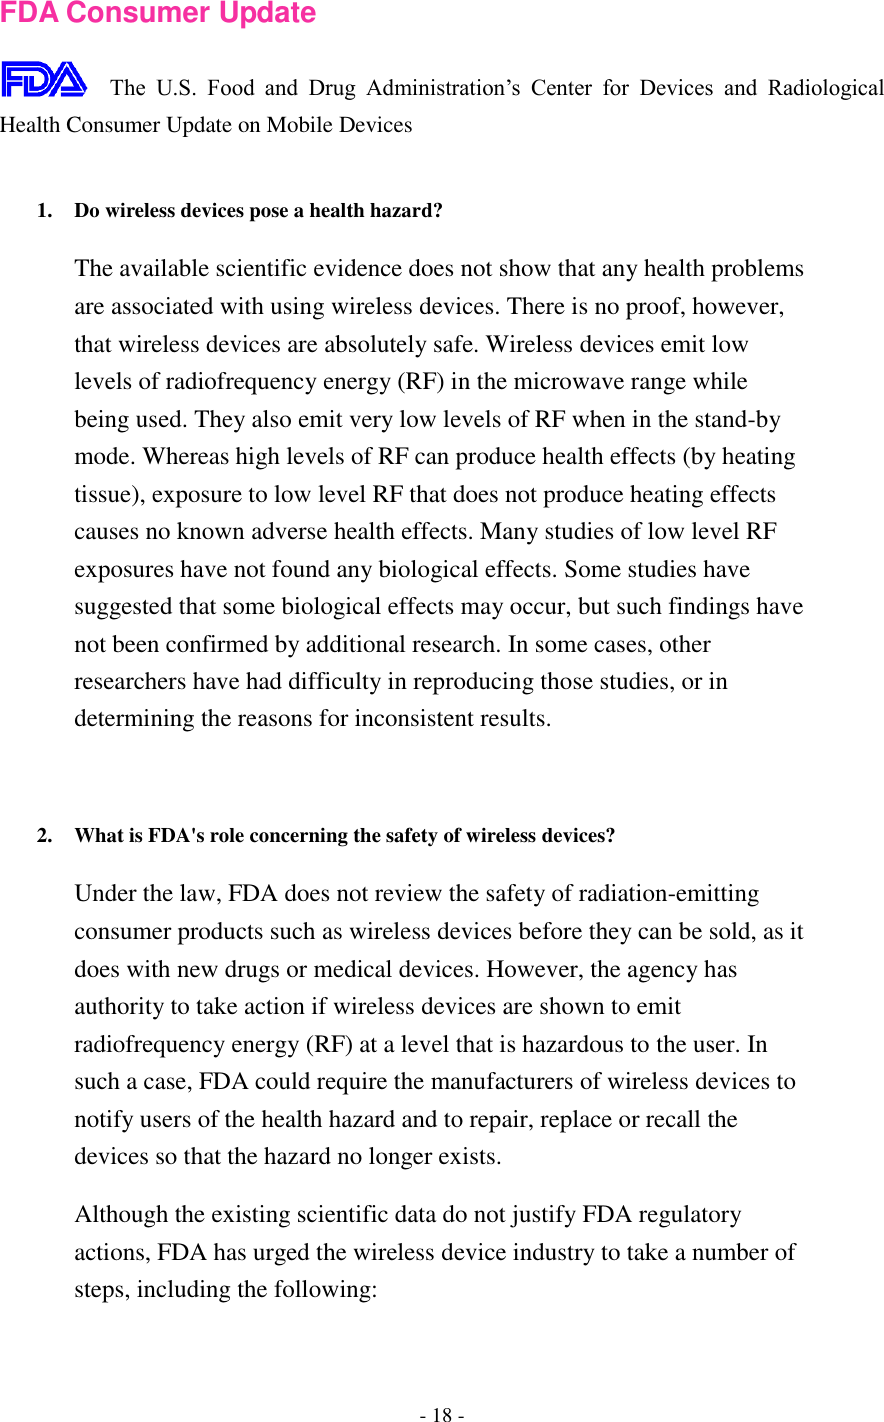 - 18 -  FDA Consumer Update  The  U.S.  Food  and  Drug  Administration’s  Center  for  Devices  and  Radiological Health Consumer Update on Mobile Devices  1. Do wireless devices pose a health hazard?   The available scientific evidence does not show that any health problems are associated with using wireless devices. There is no proof, however, that wireless devices are absolutely safe. Wireless devices emit low levels of radiofrequency energy (RF) in the microwave range while being used. They also emit very low levels of RF when in the stand-by mode. Whereas high levels of RF can produce health effects (by heating tissue), exposure to low level RF that does not produce heating effects causes no known adverse health effects. Many studies of low level RF exposures have not found any biological effects. Some studies have suggested that some biological effects may occur, but such findings have not been confirmed by additional research. In some cases, other researchers have had difficulty in reproducing those studies, or in determining the reasons for inconsistent results.   2. What is FDA&apos;s role concerning the safety of wireless devices?   Under the law, FDA does not review the safety of radiation-emitting consumer products such as wireless devices before they can be sold, as it does with new drugs or medical devices. However, the agency has authority to take action if wireless devices are shown to emit radiofrequency energy (RF) at a level that is hazardous to the user. In such a case, FDA could require the manufacturers of wireless devices to notify users of the health hazard and to repair, replace or recall the devices so that the hazard no longer exists. Although the existing scientific data do not justify FDA regulatory actions, FDA has urged the wireless device industry to take a number of steps, including the following: 